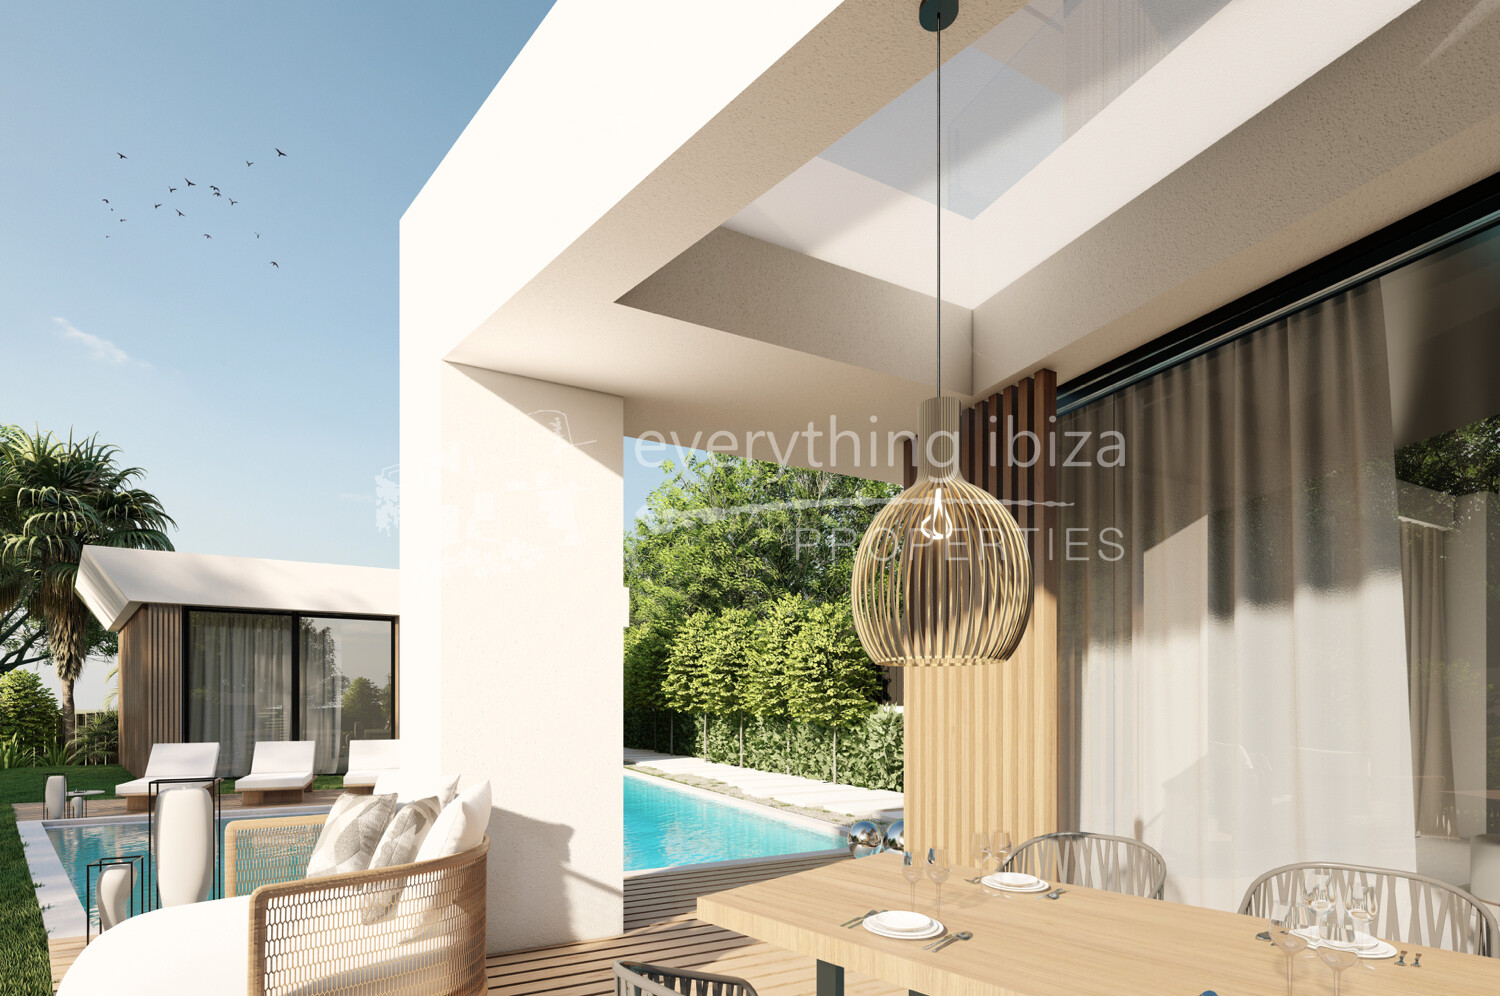 Luxury Brand New Villa with Sea View Roof Terrace, ref 1660, for sale in Ibiza by everything ibiza Properties